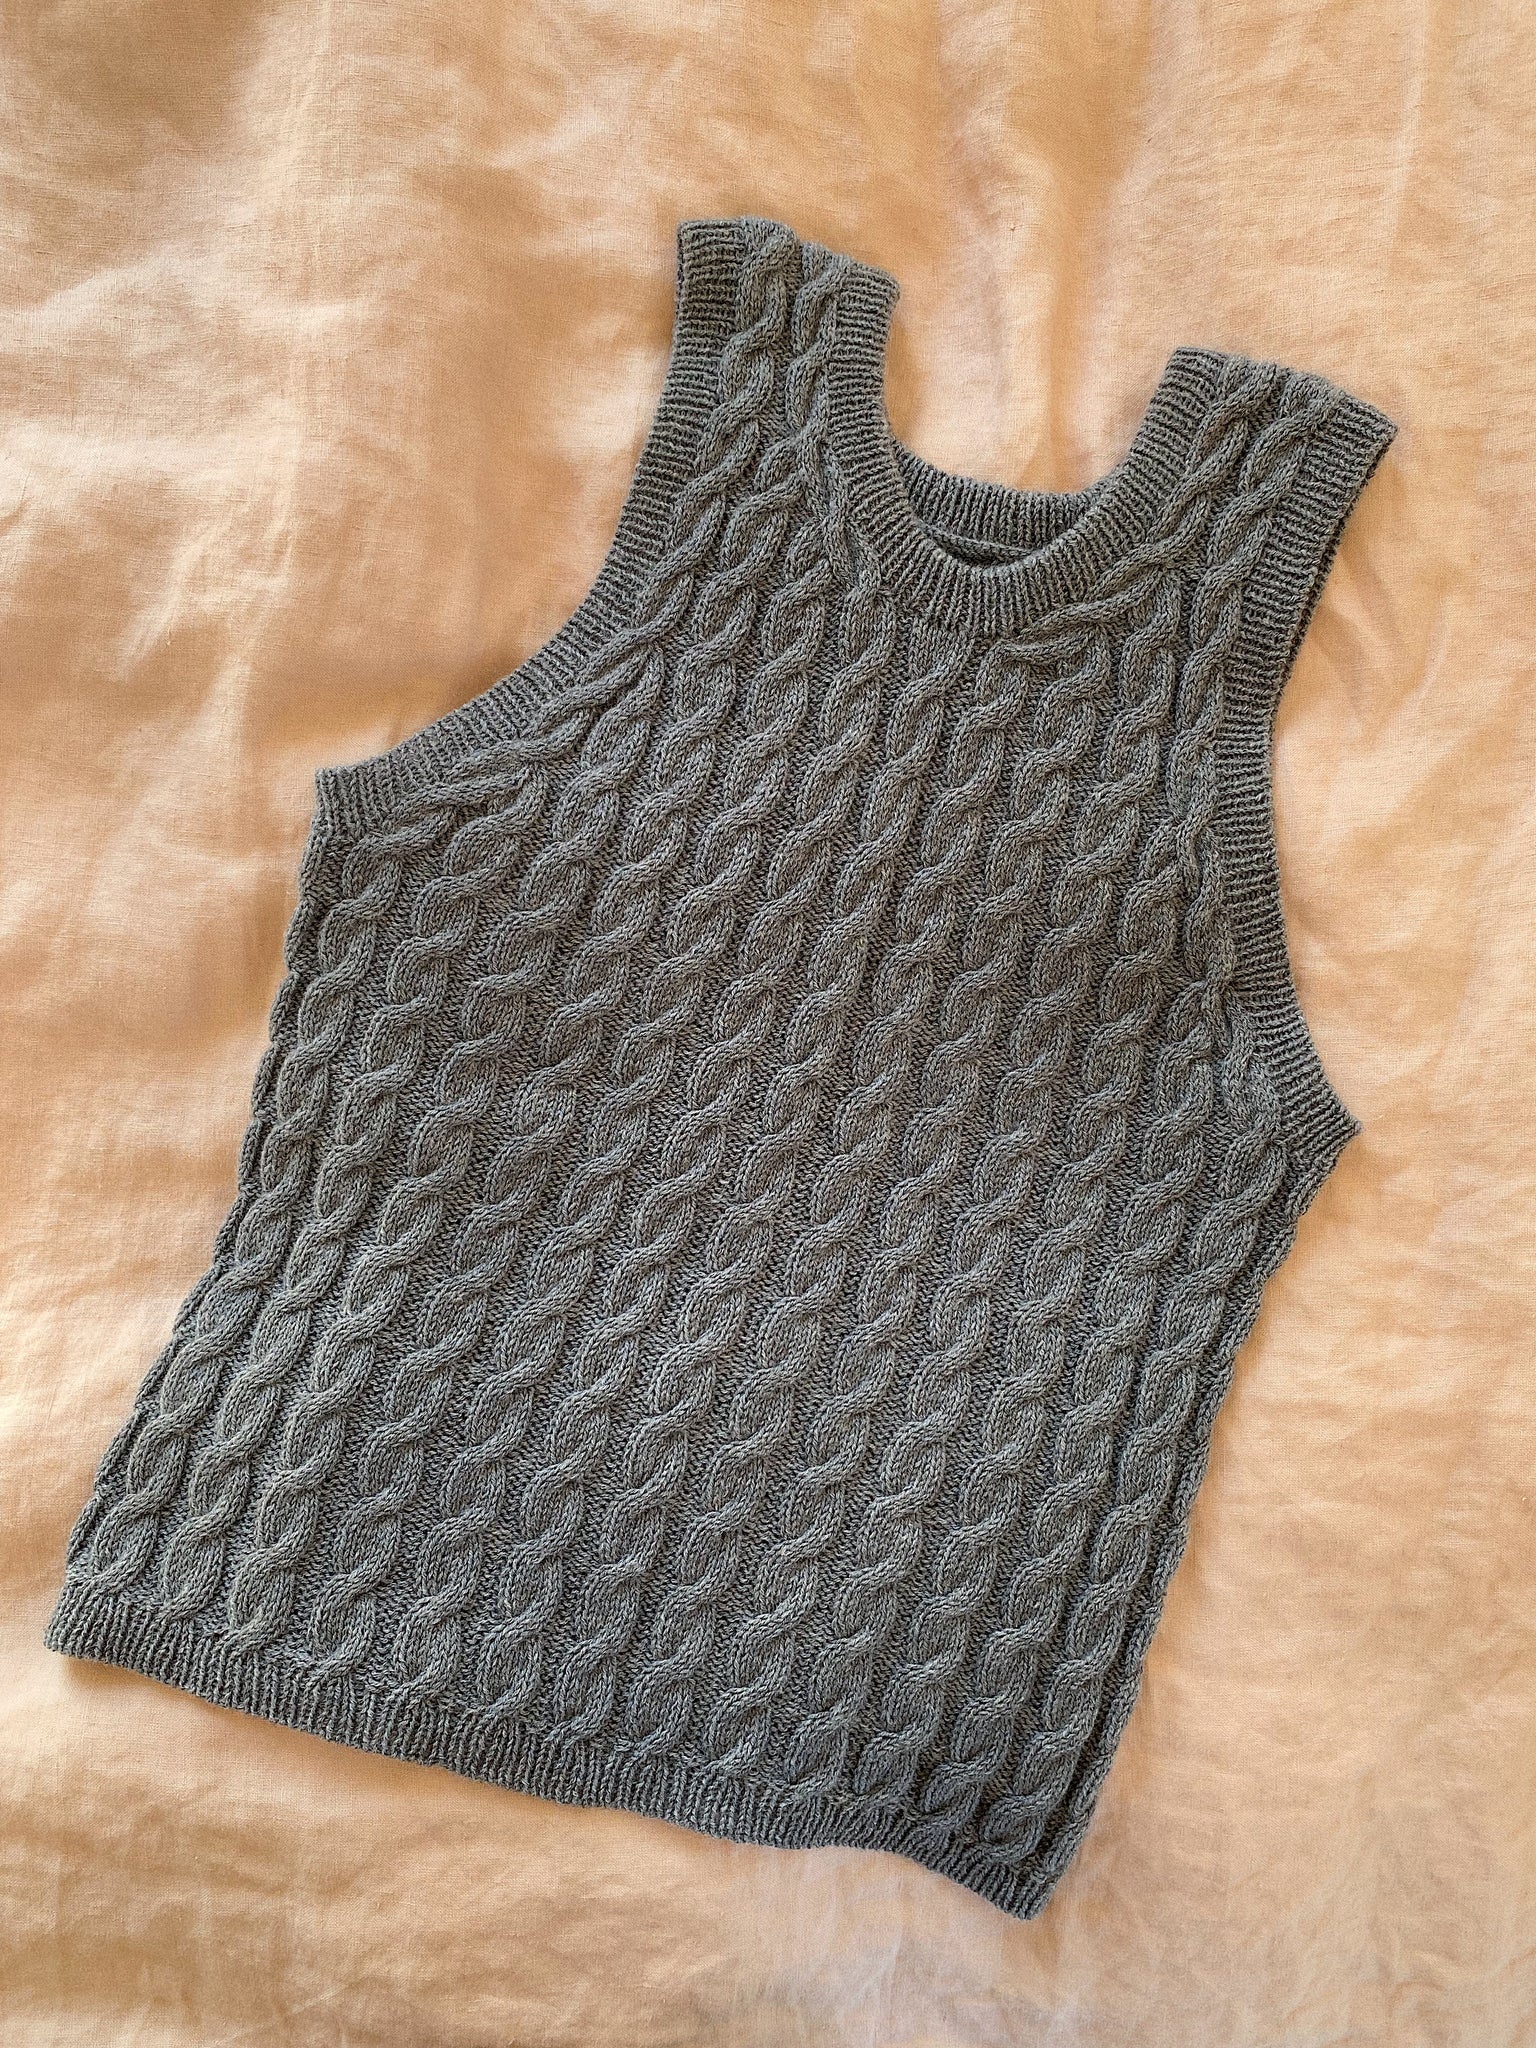 Camisole No. 8 My Favourite Things Knitwear - Strikkekit